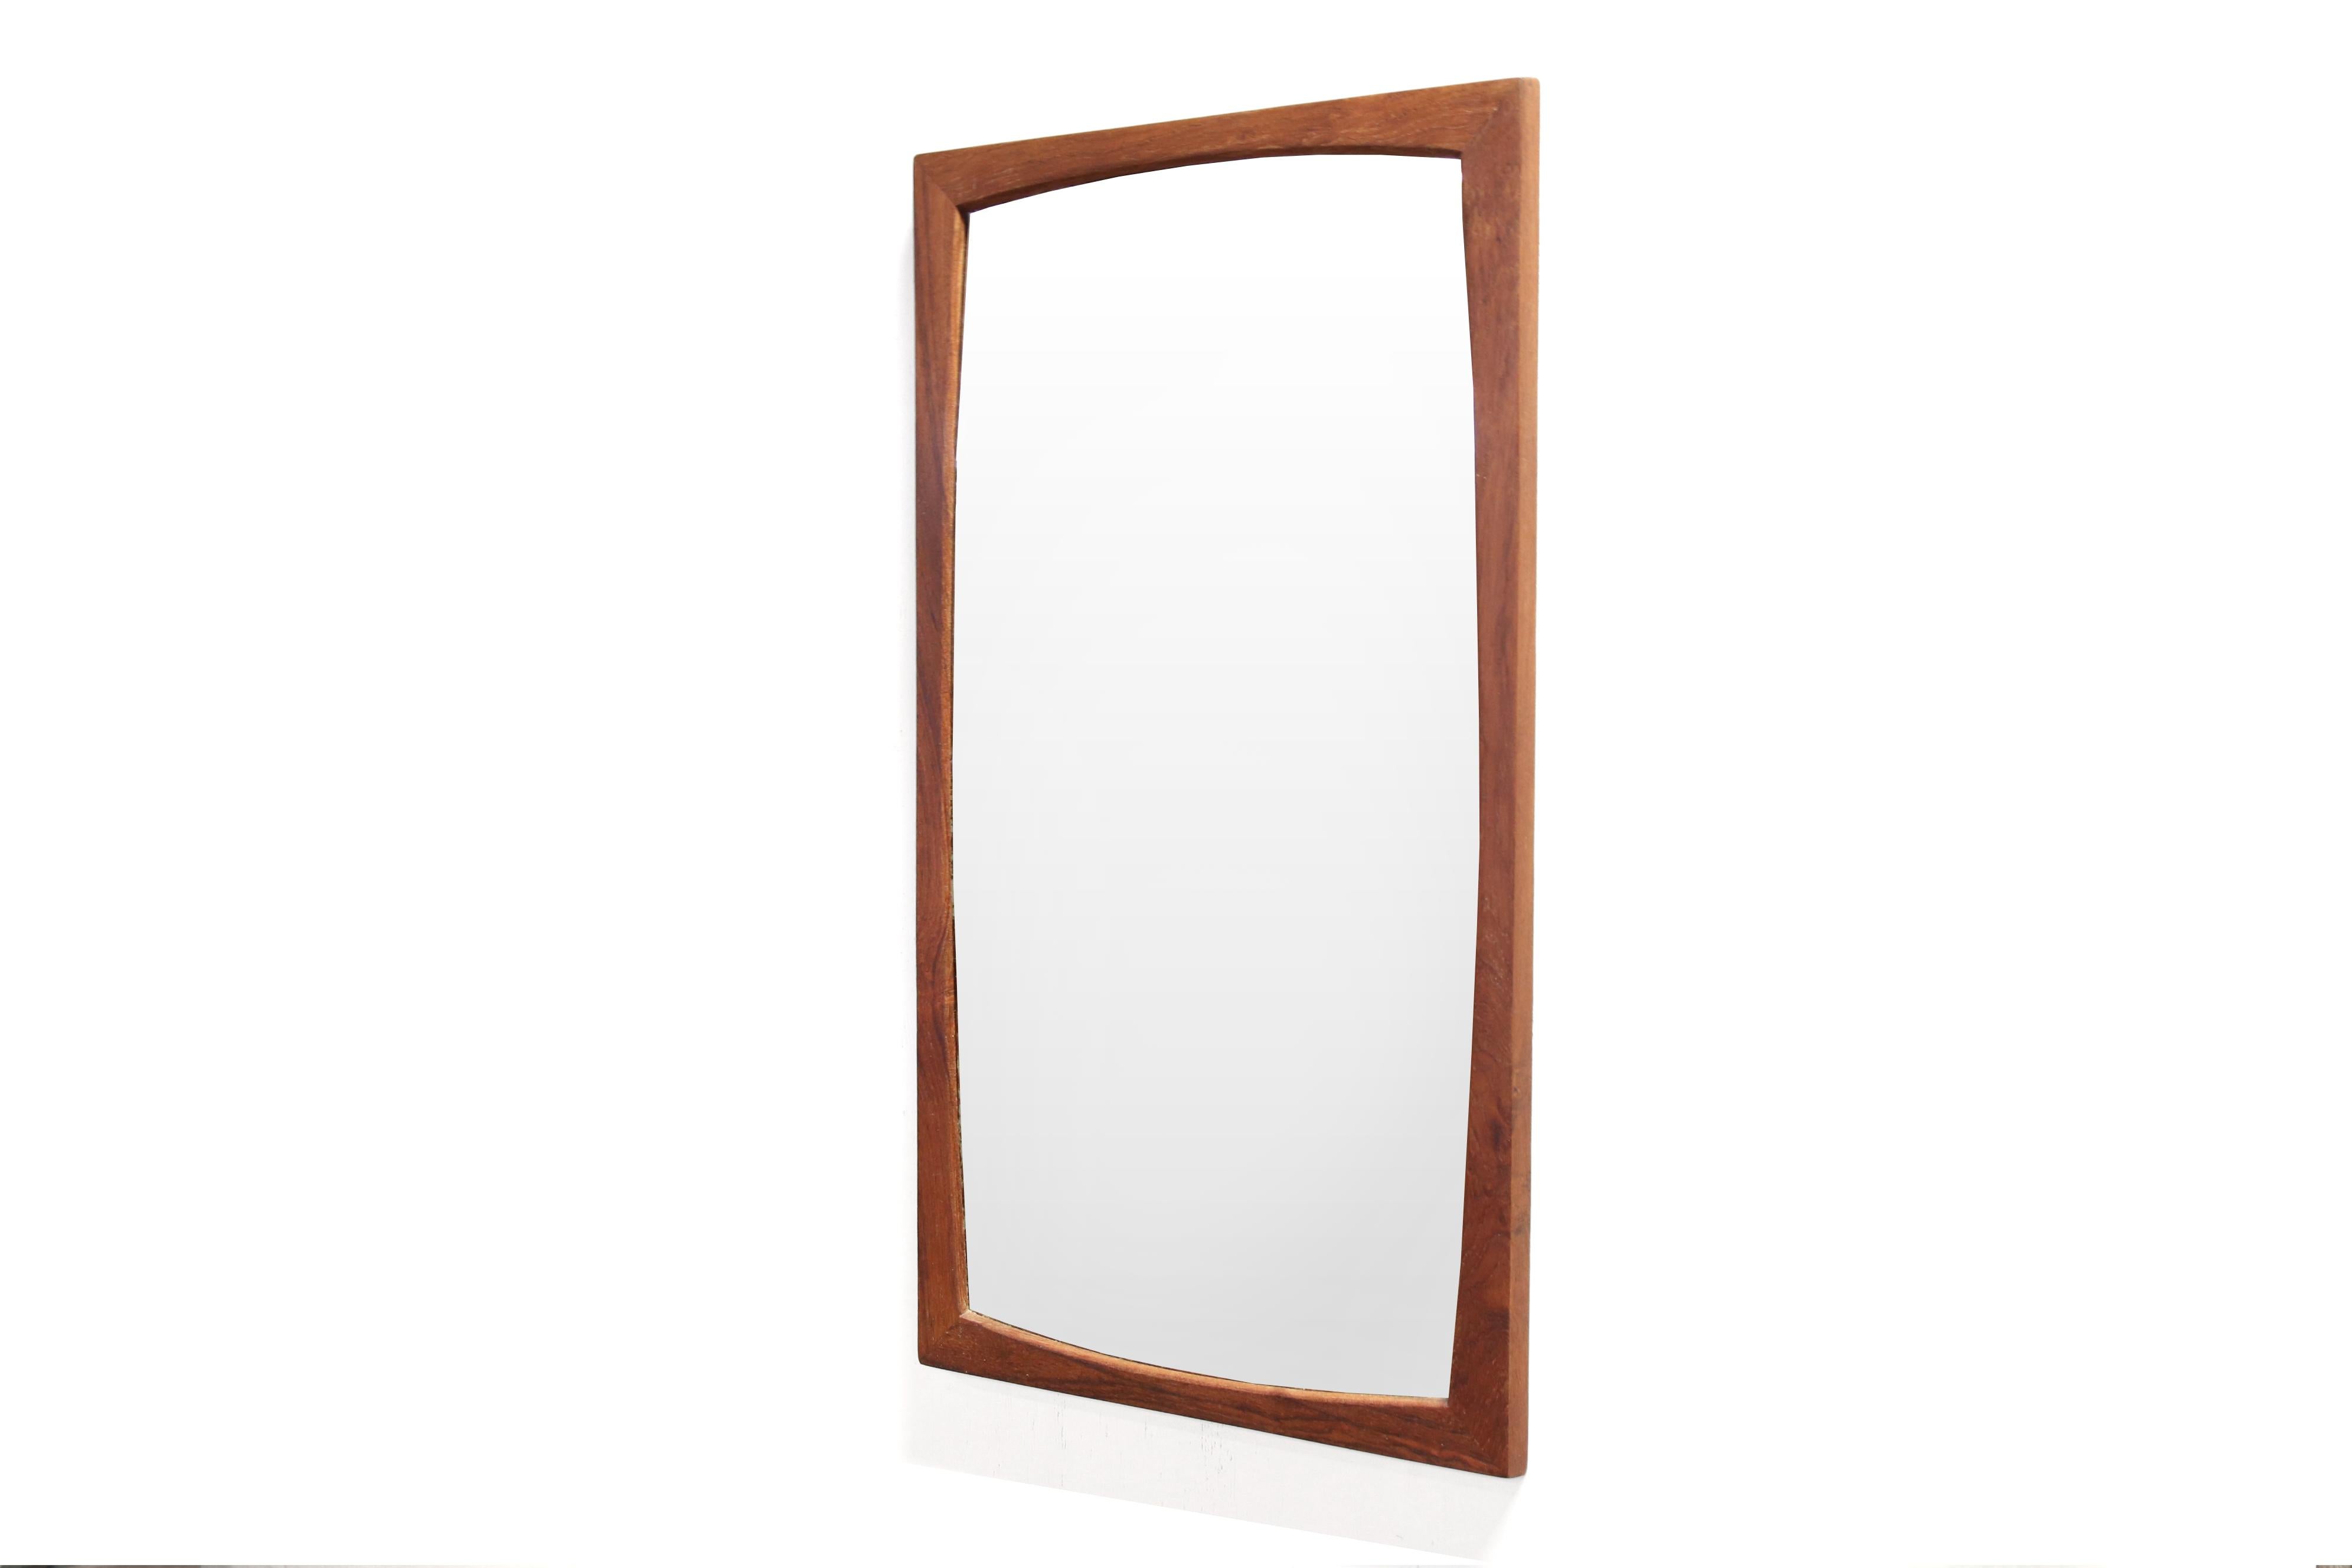 Very beautiful teak mirror designed by Kai Kristiansen and produced by Aksel Kjersgaard in Odder Denmark. It is often mistakenly thought that Aksel Kjersgaard is the designer of these mirrors, but Aksel Kjersgaard is mainly a producer who has, among